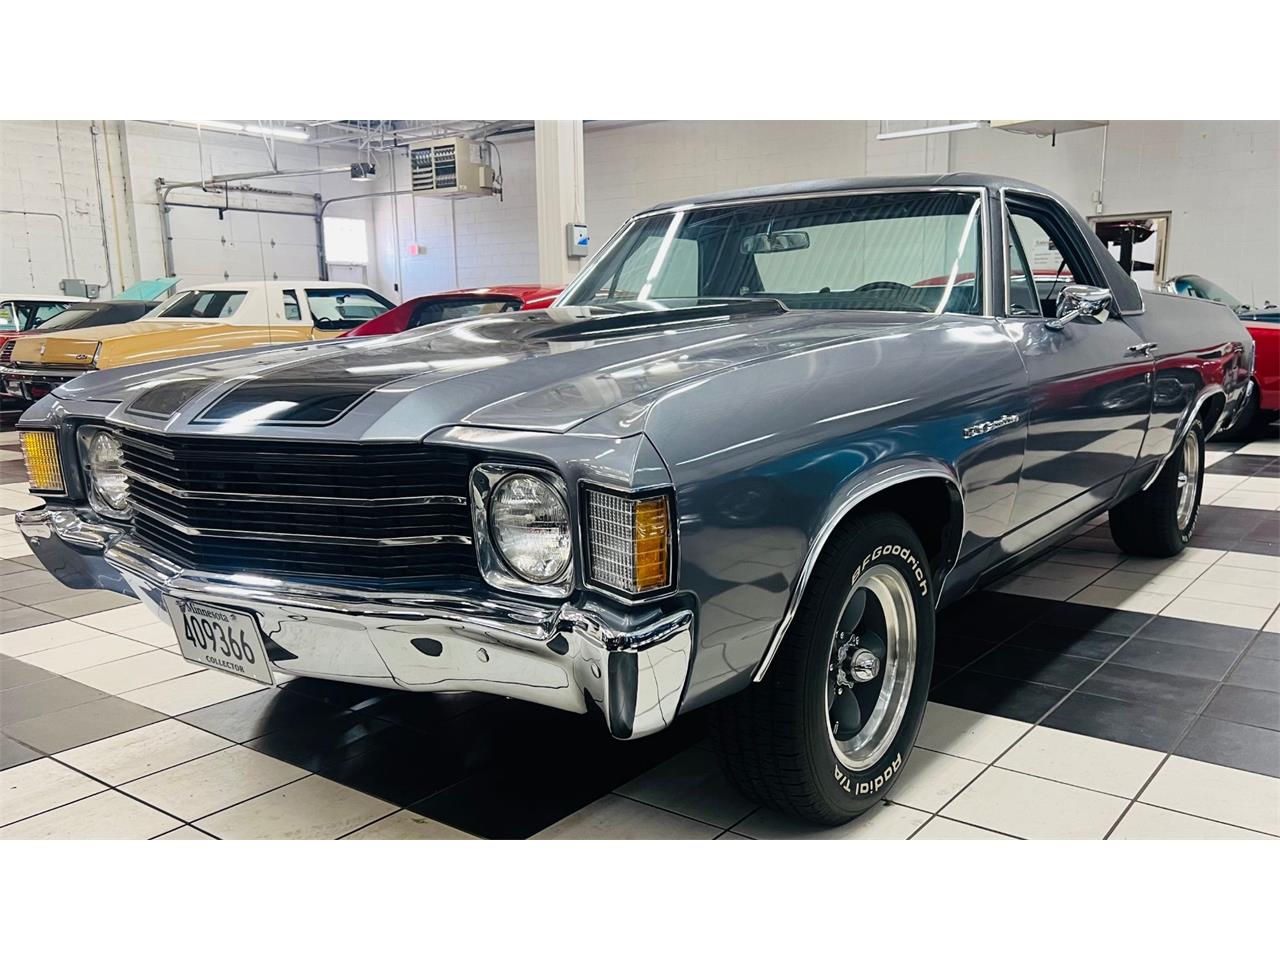 For Sale: 1972 Chevrolet El Camino in Annandale, Minnesota for sale in Annandale, MN